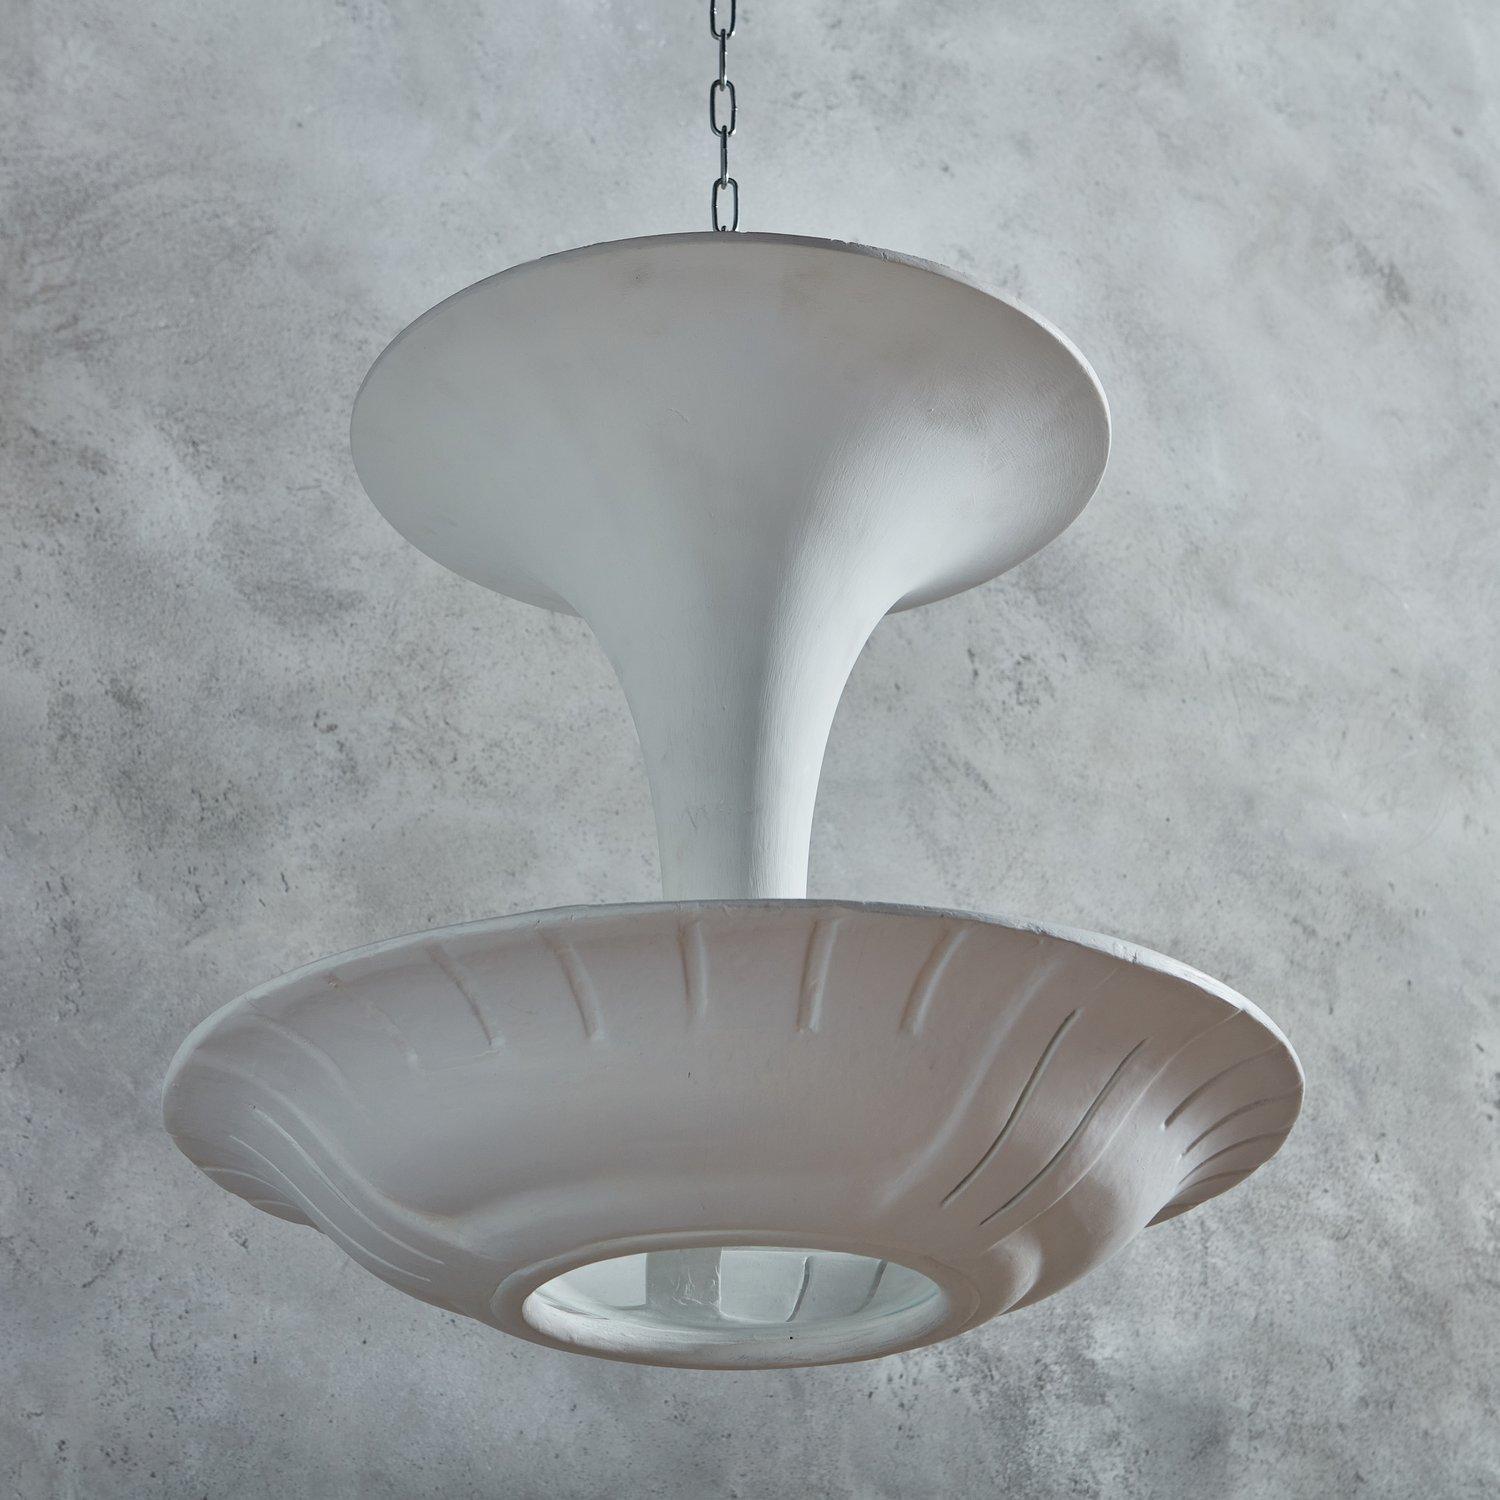 An elegant 1940s plaster flush mount light fixture attributed to Maison Arlus, Paris. This pendant reflects the French Art Deco style and features a 22” suspended, curved plaster disc. The disk has linear cutout details and a circular glass insert